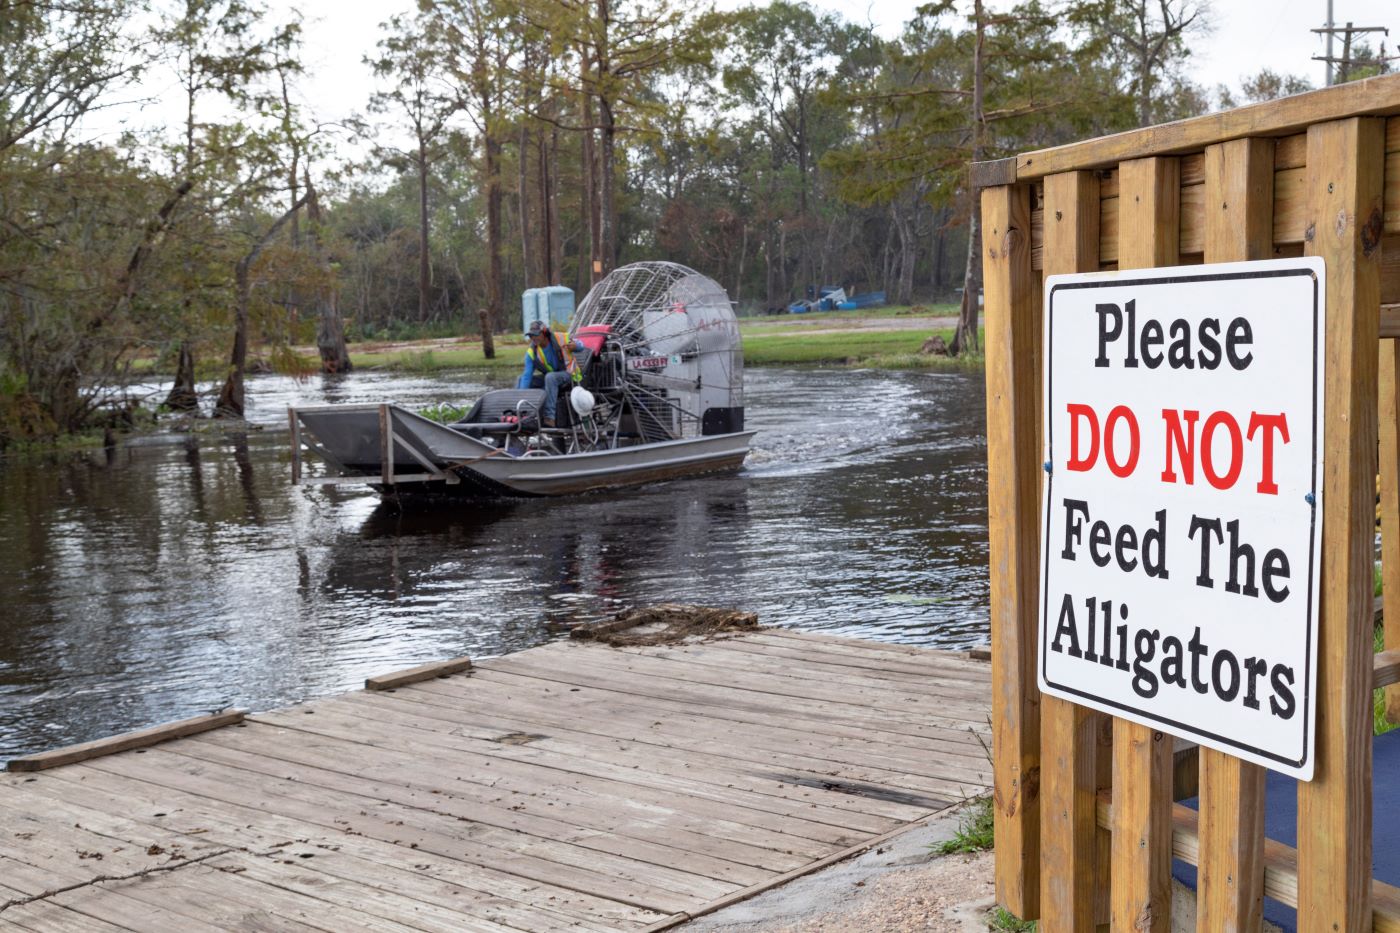 Airboats are often used to shuttle crews to and from sites, and it’s part of their safety training to watch out for snakes and gators along the way! 